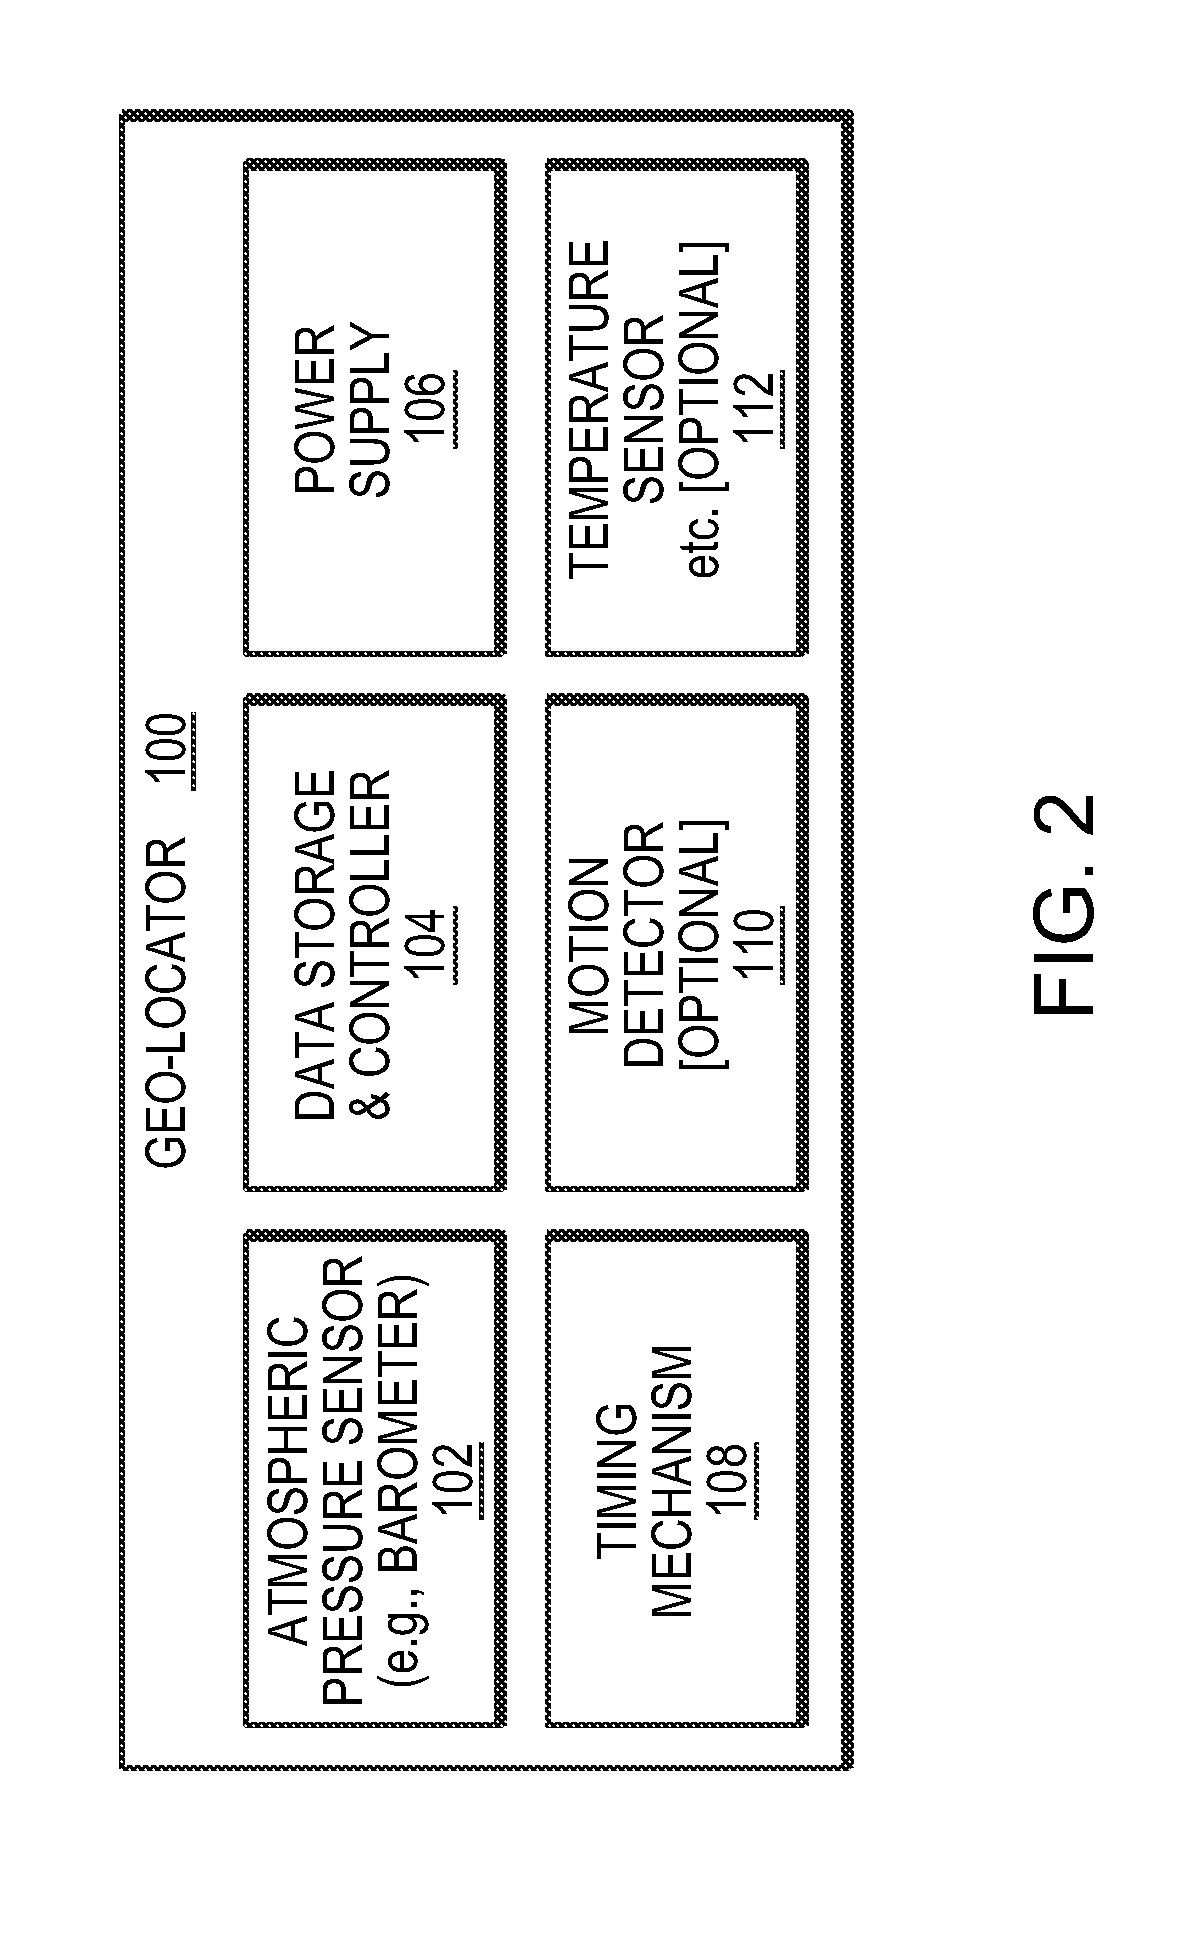 Geo-location systems and methods based on atmospheric pressure measurement